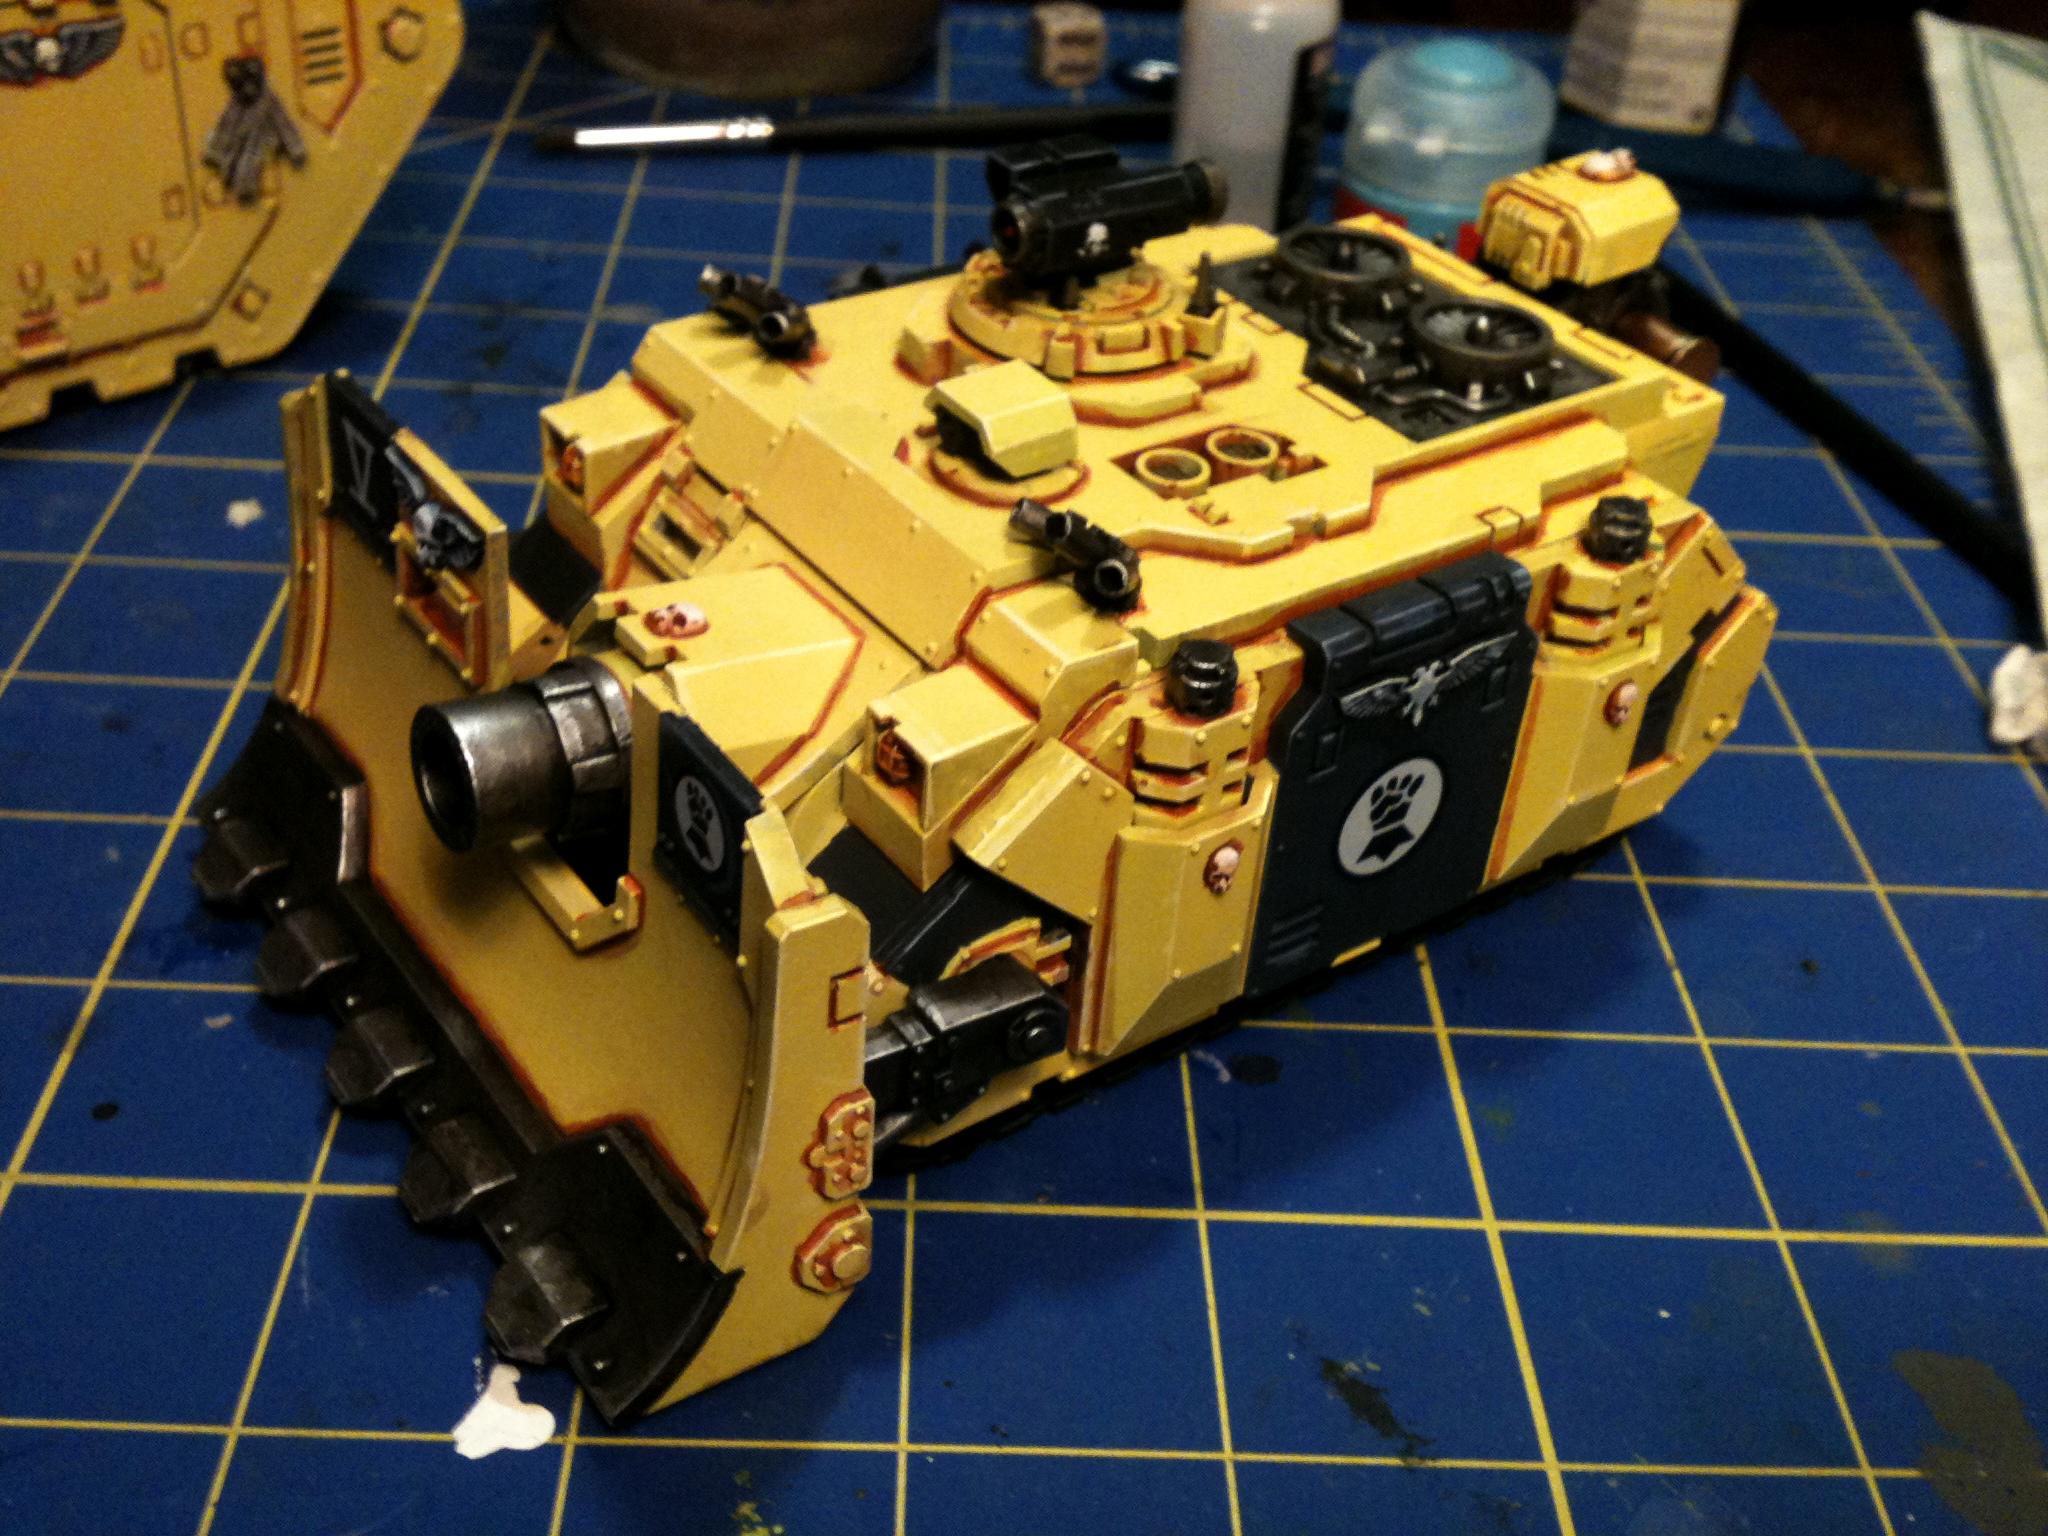 Black, Fist, Fists, Imperial, Imperial Fists, Painted, Space Marines, Tank, Vindicator, Warhammer 40,000, Yellow